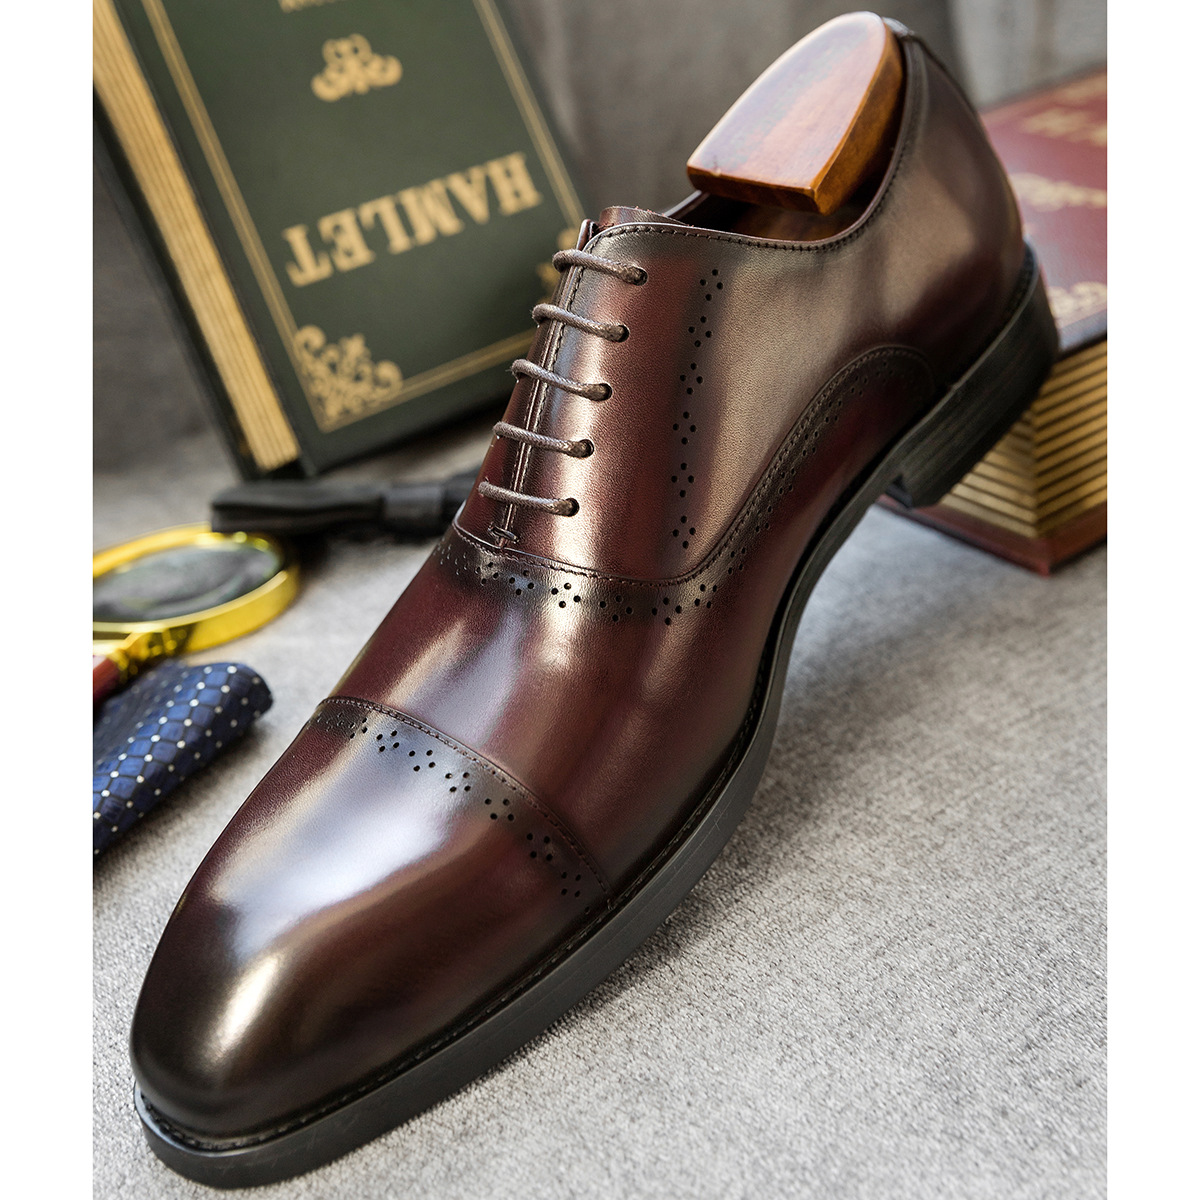 Business casual formal leather shoes